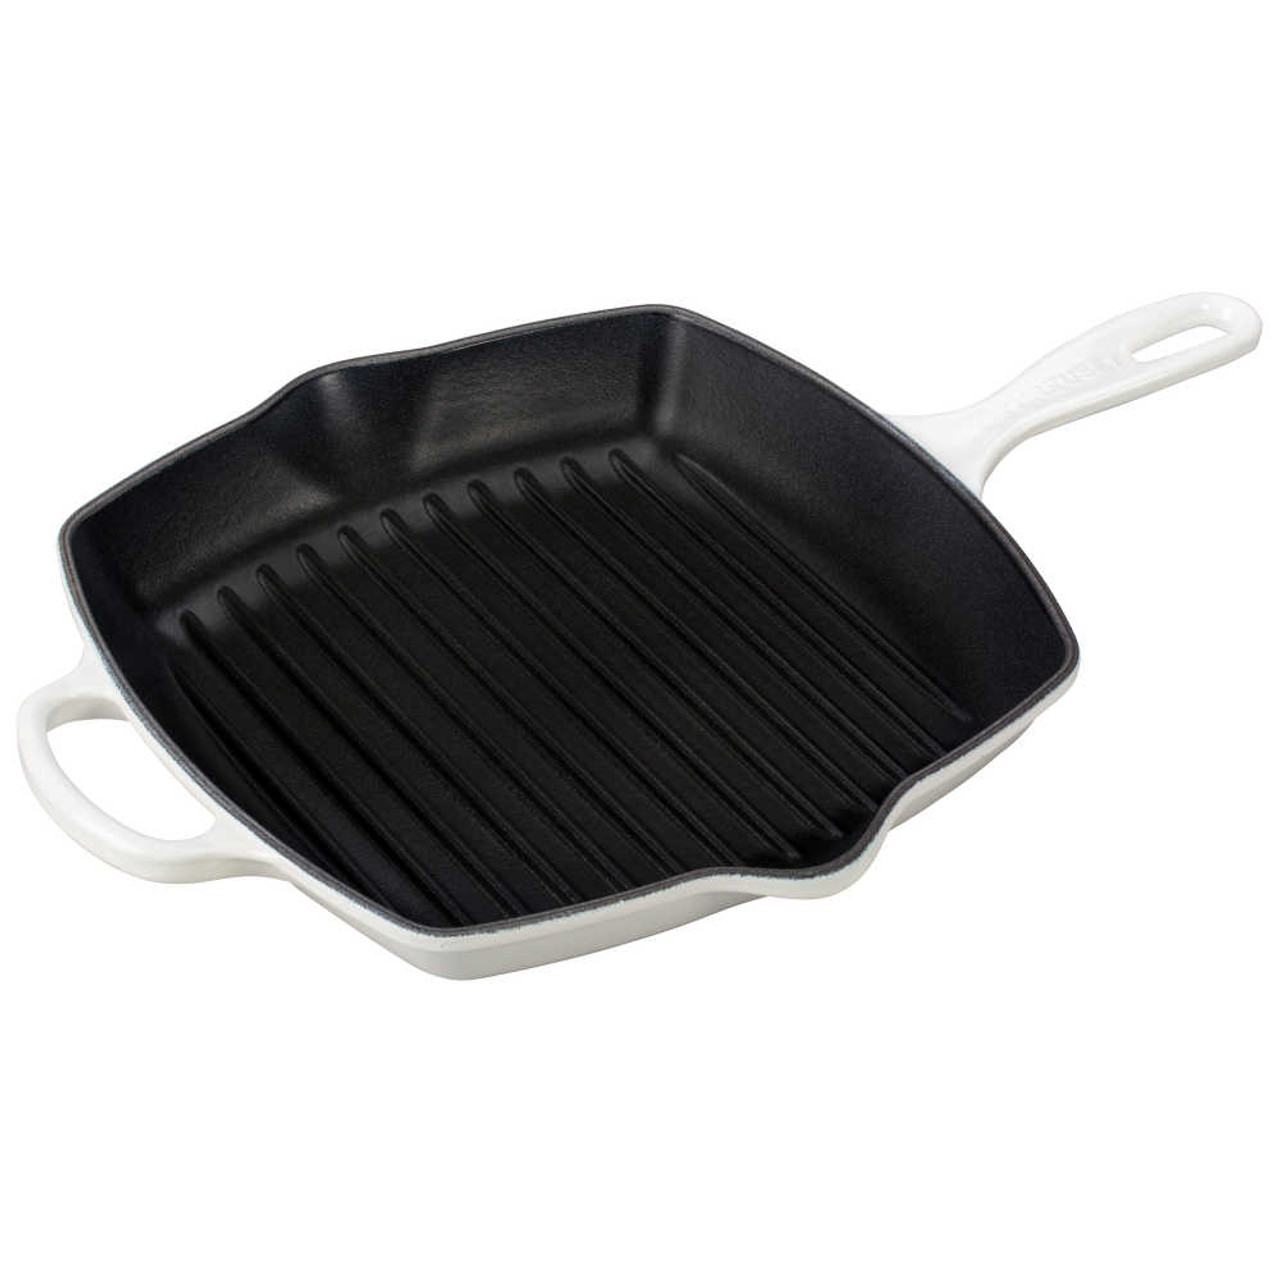 https://cdn11.bigcommerce.com/s-hccytny0od/images/stencil/1280x1280/products/5163/22338/Le_Creuset_Cast_Iron_Signature_Square_Skillet_Grill_in_White__70276.1668635690.jpg?c=2?imbypass=on